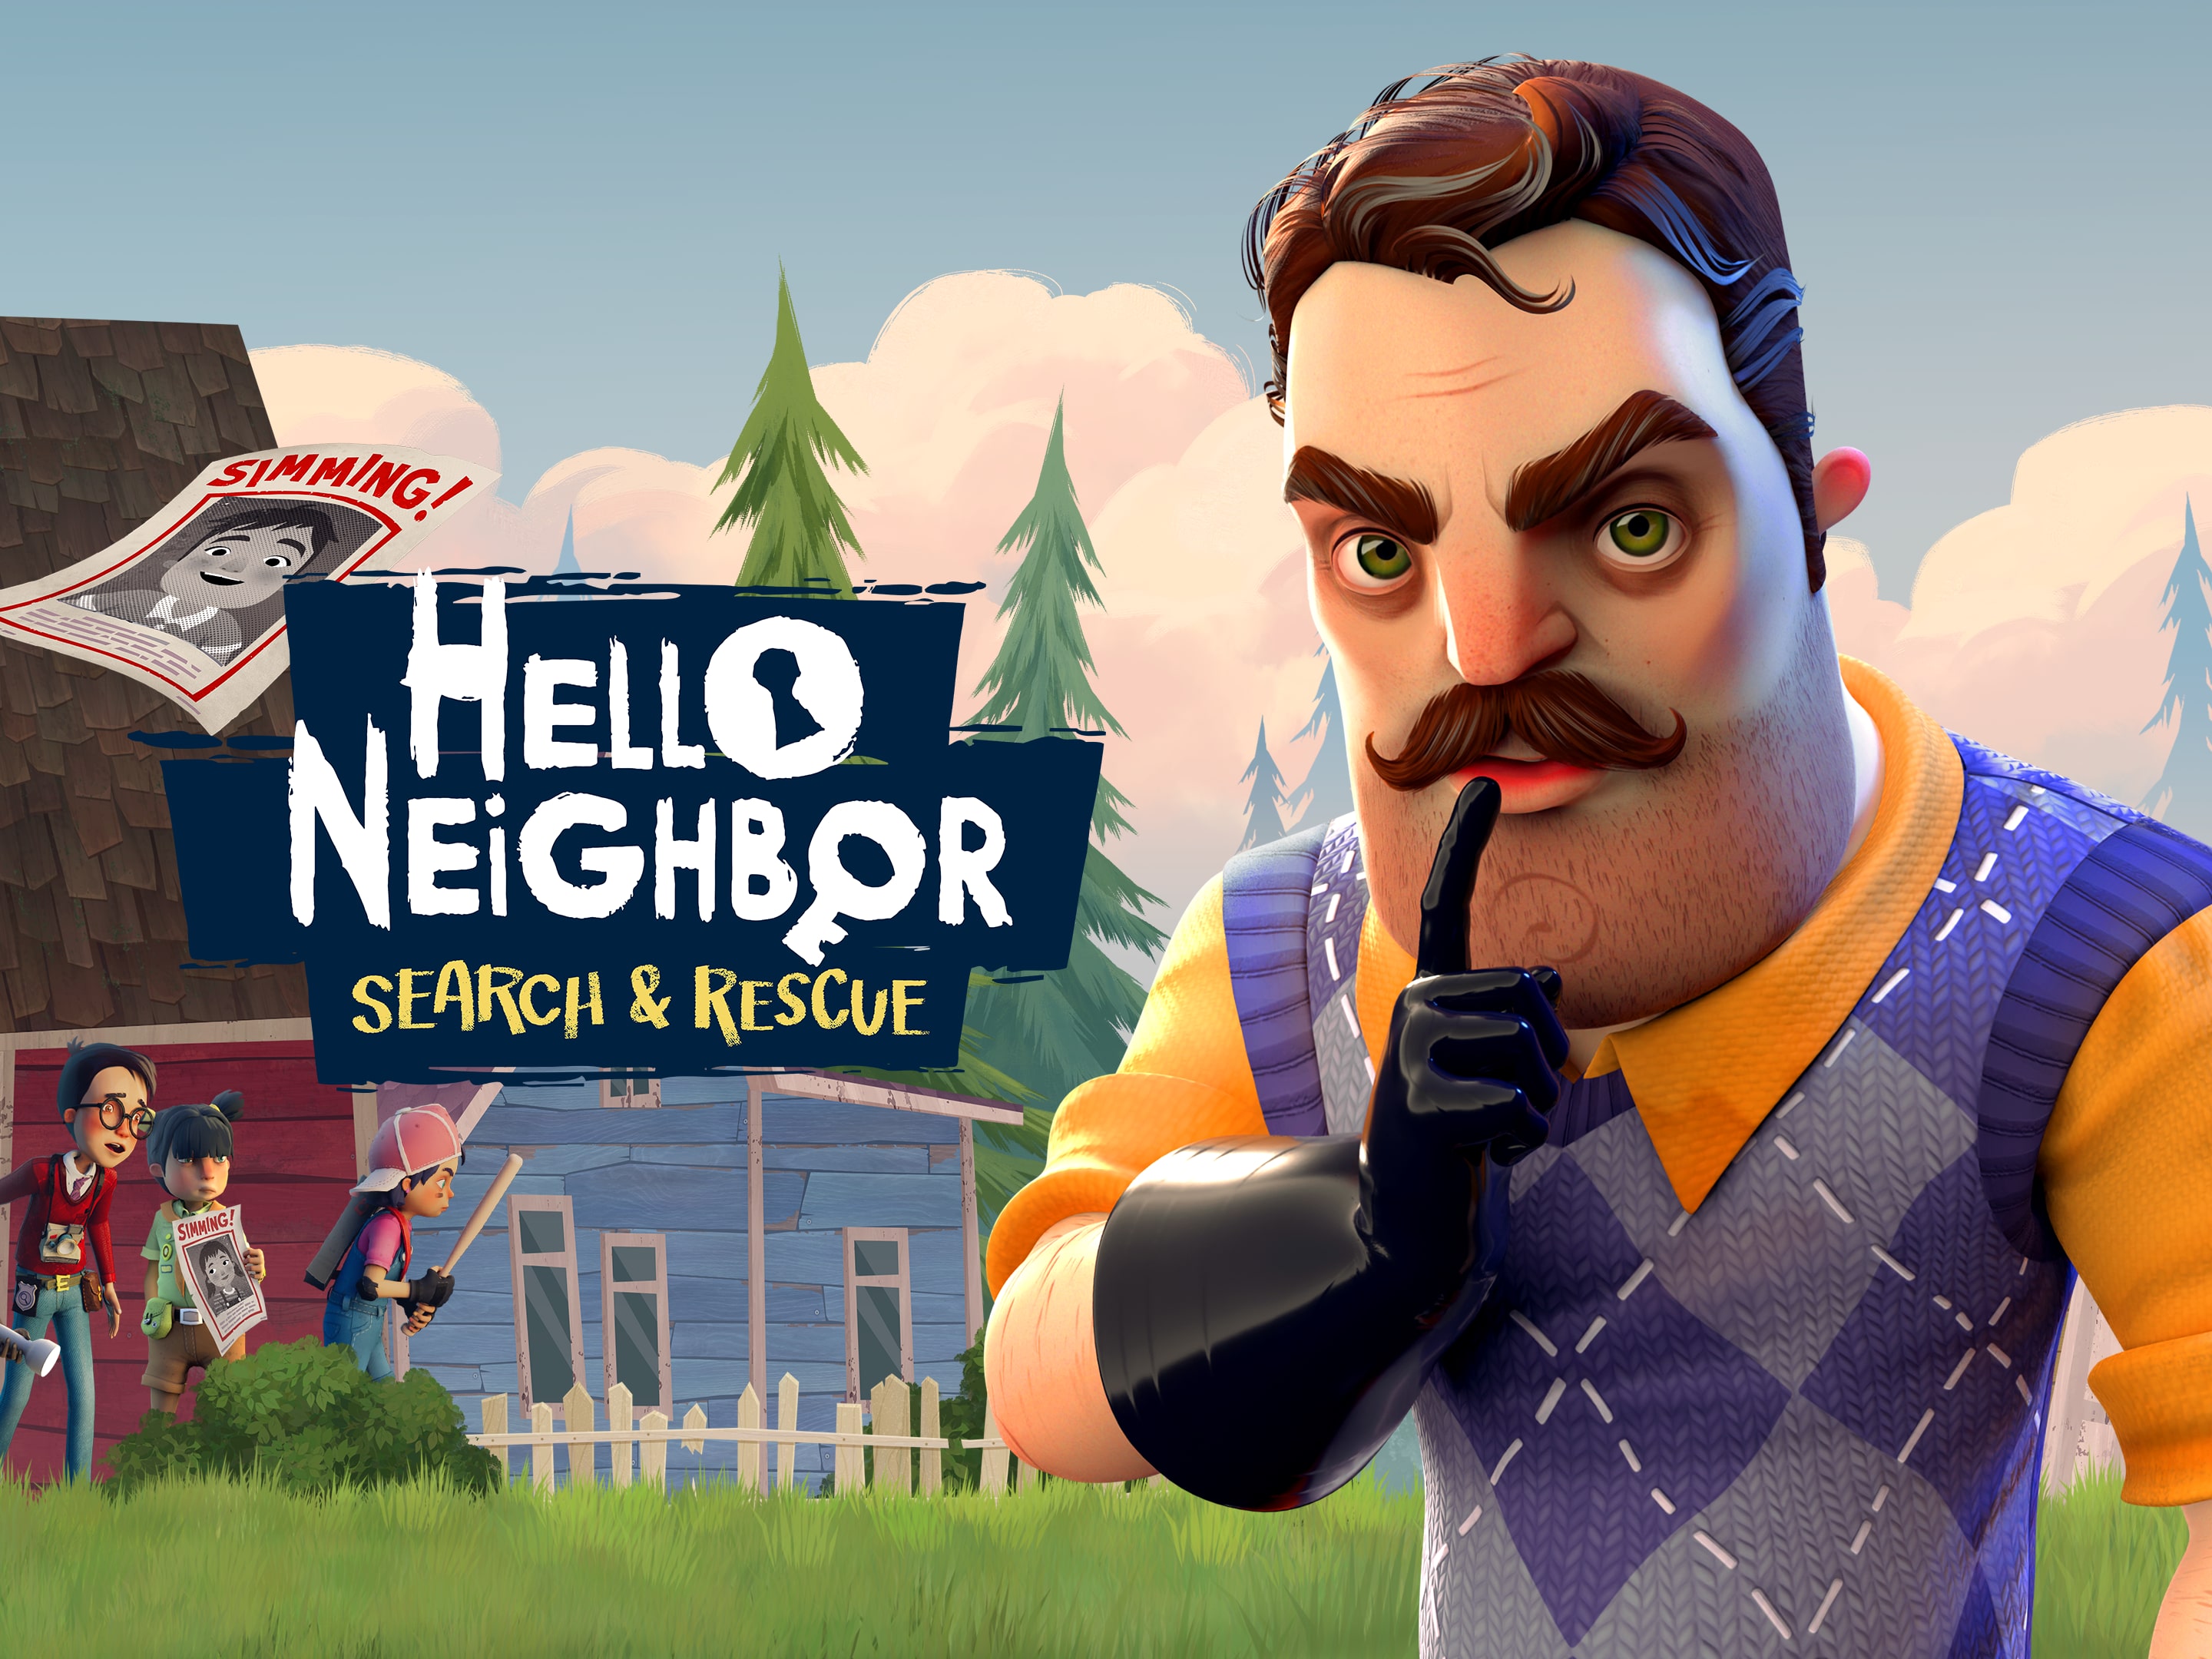 Rescue Neighbor: and Search Hello